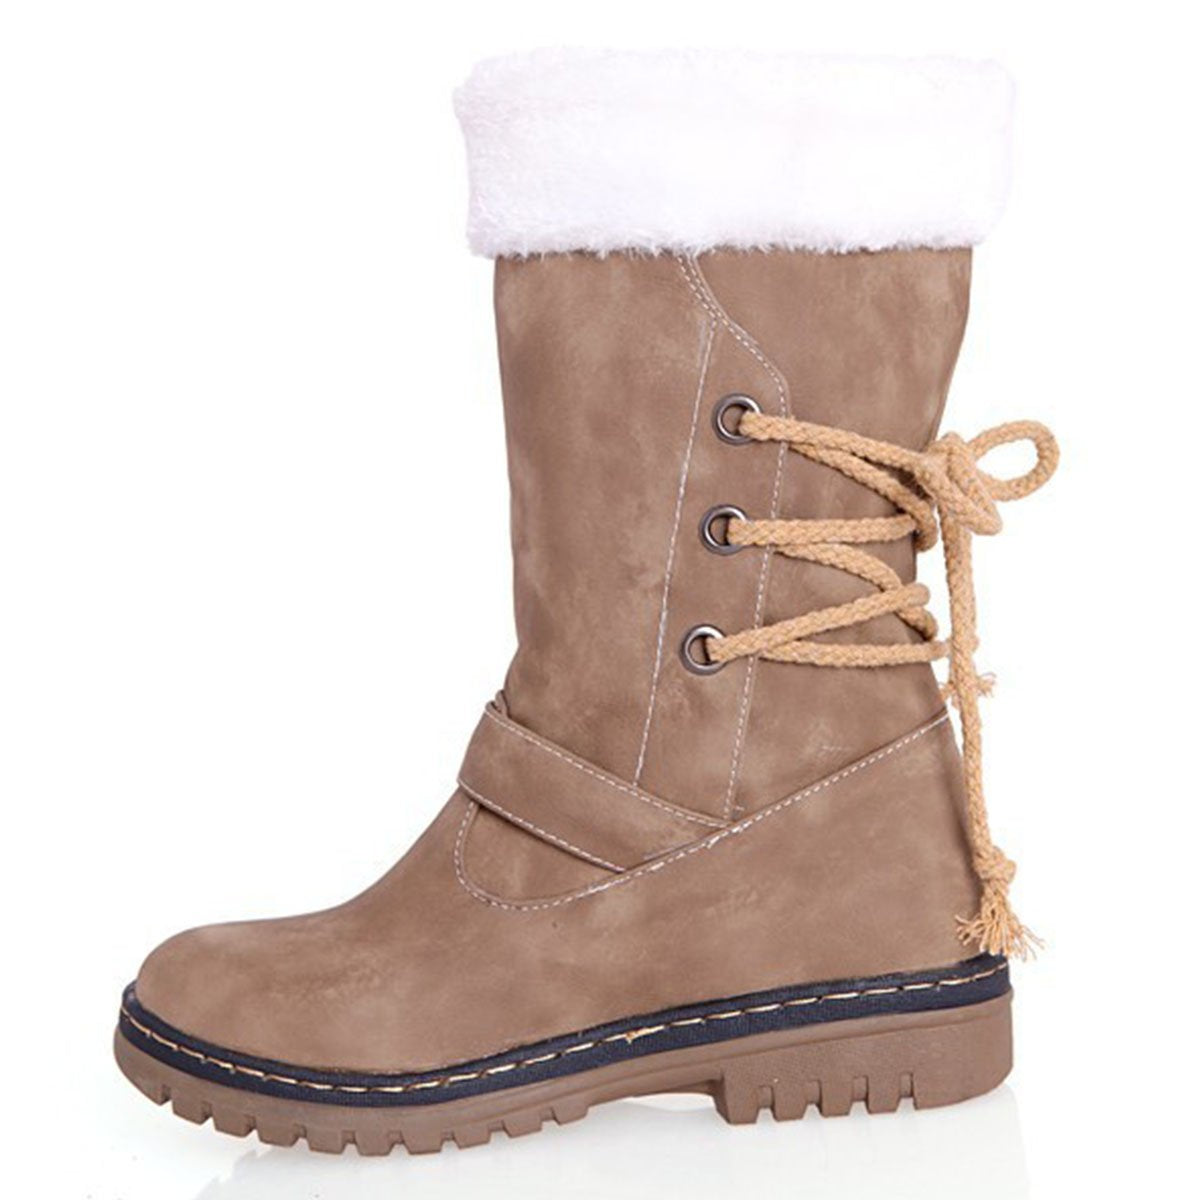 Plain Low Heeled Round Toe Date Woman Boots